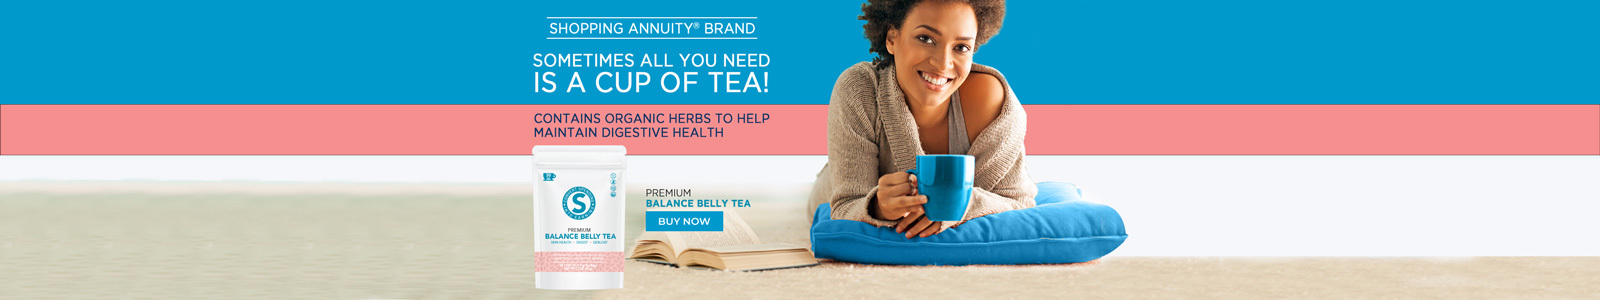 Shopping Annuity Brand, Belly Balance Tea, Sometimes all you need is a cup of tea! Contains organic herbs to help maintain digestive health. Buy Now